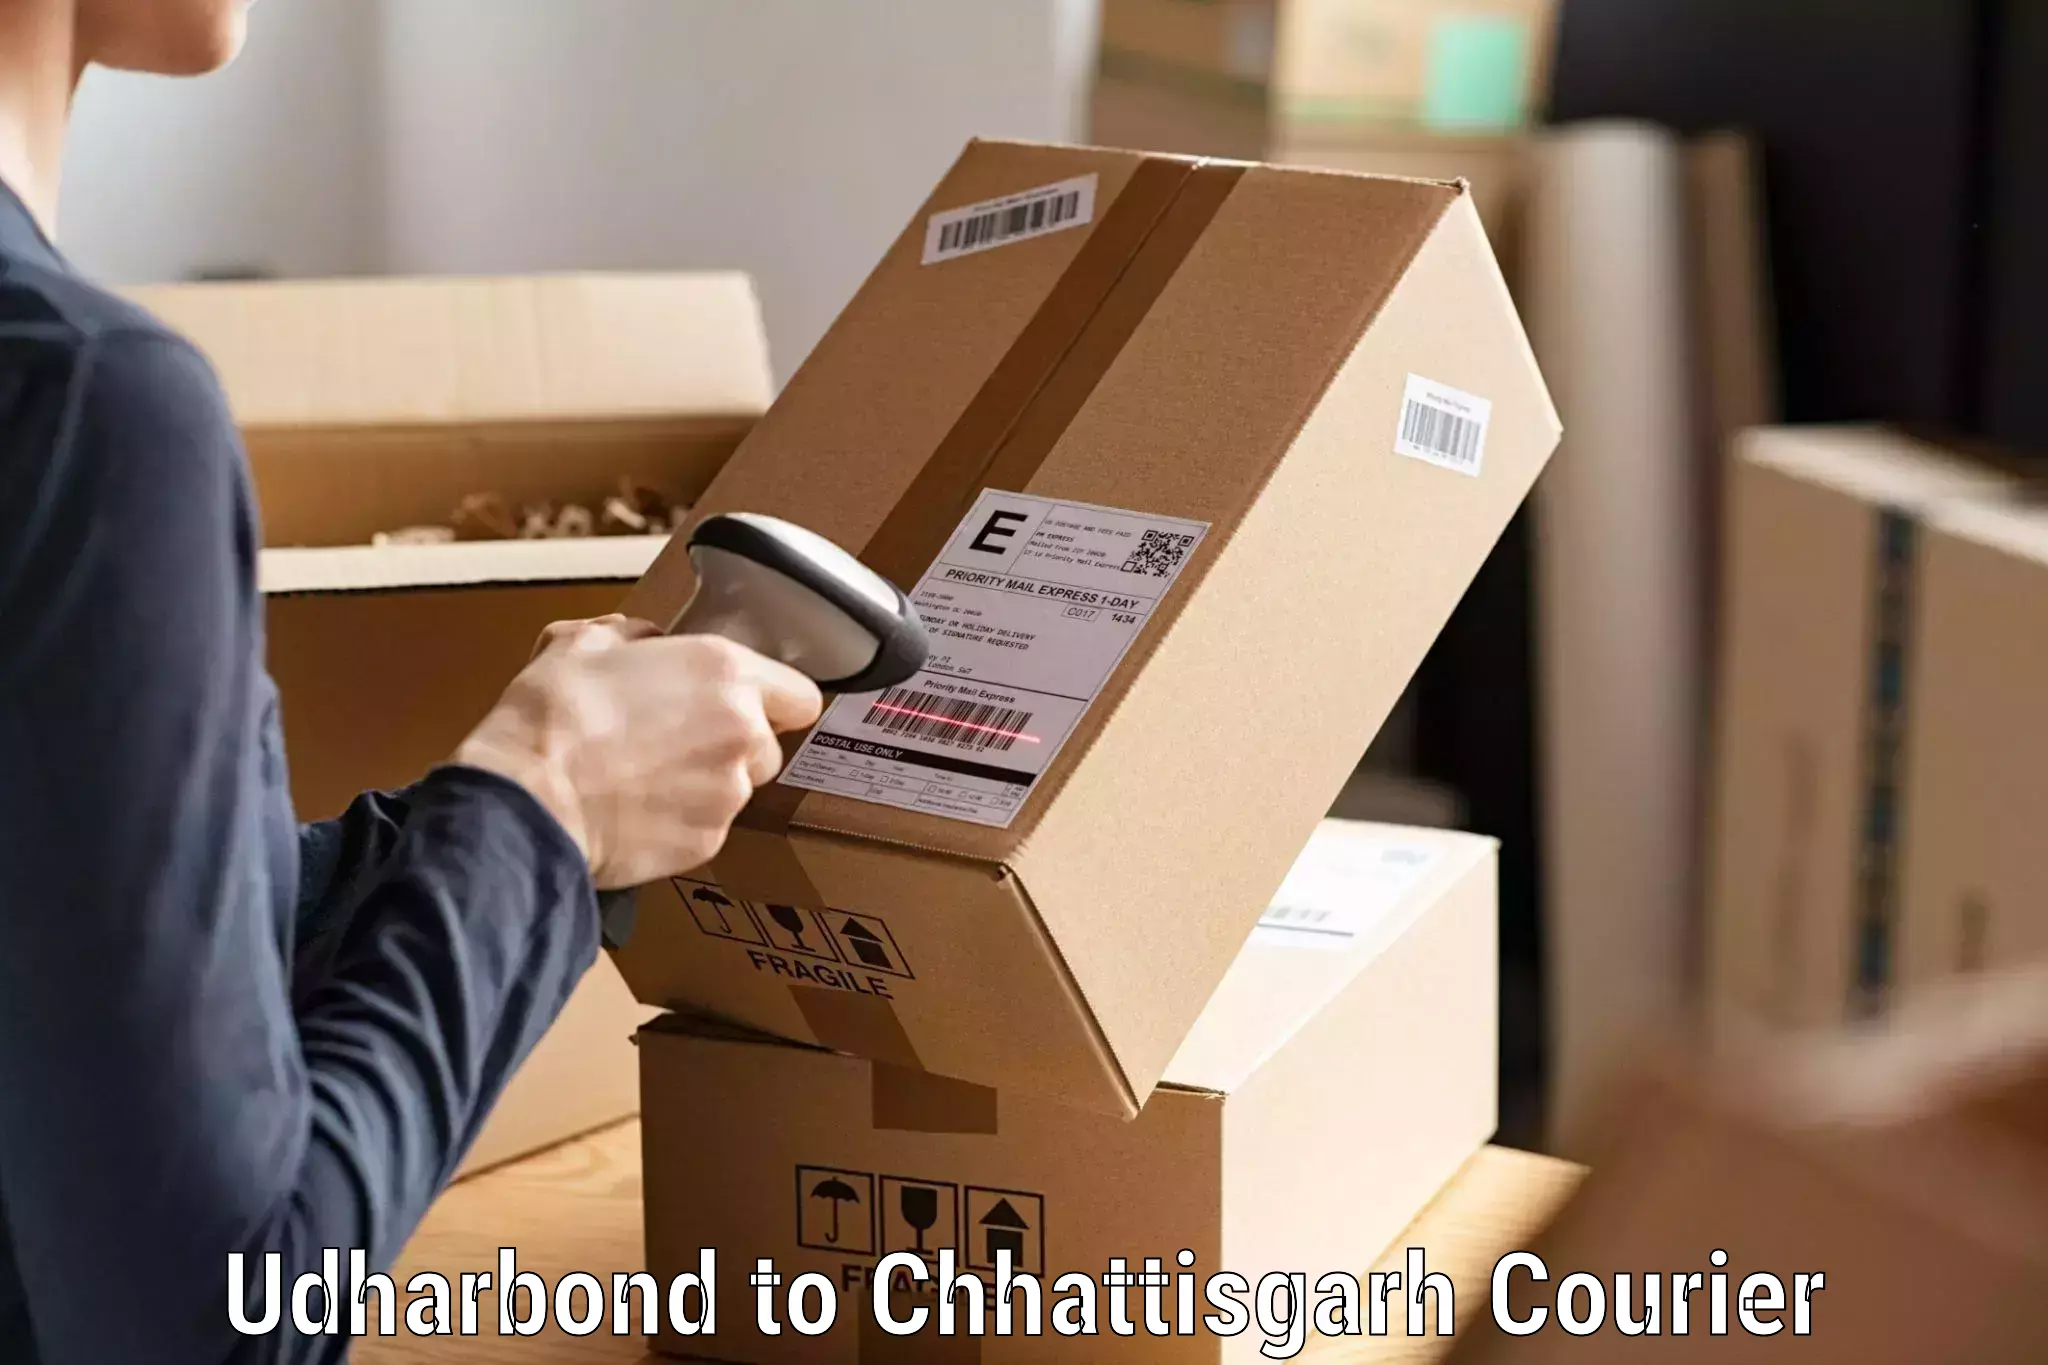 24-hour delivery options Udharbond to Berla